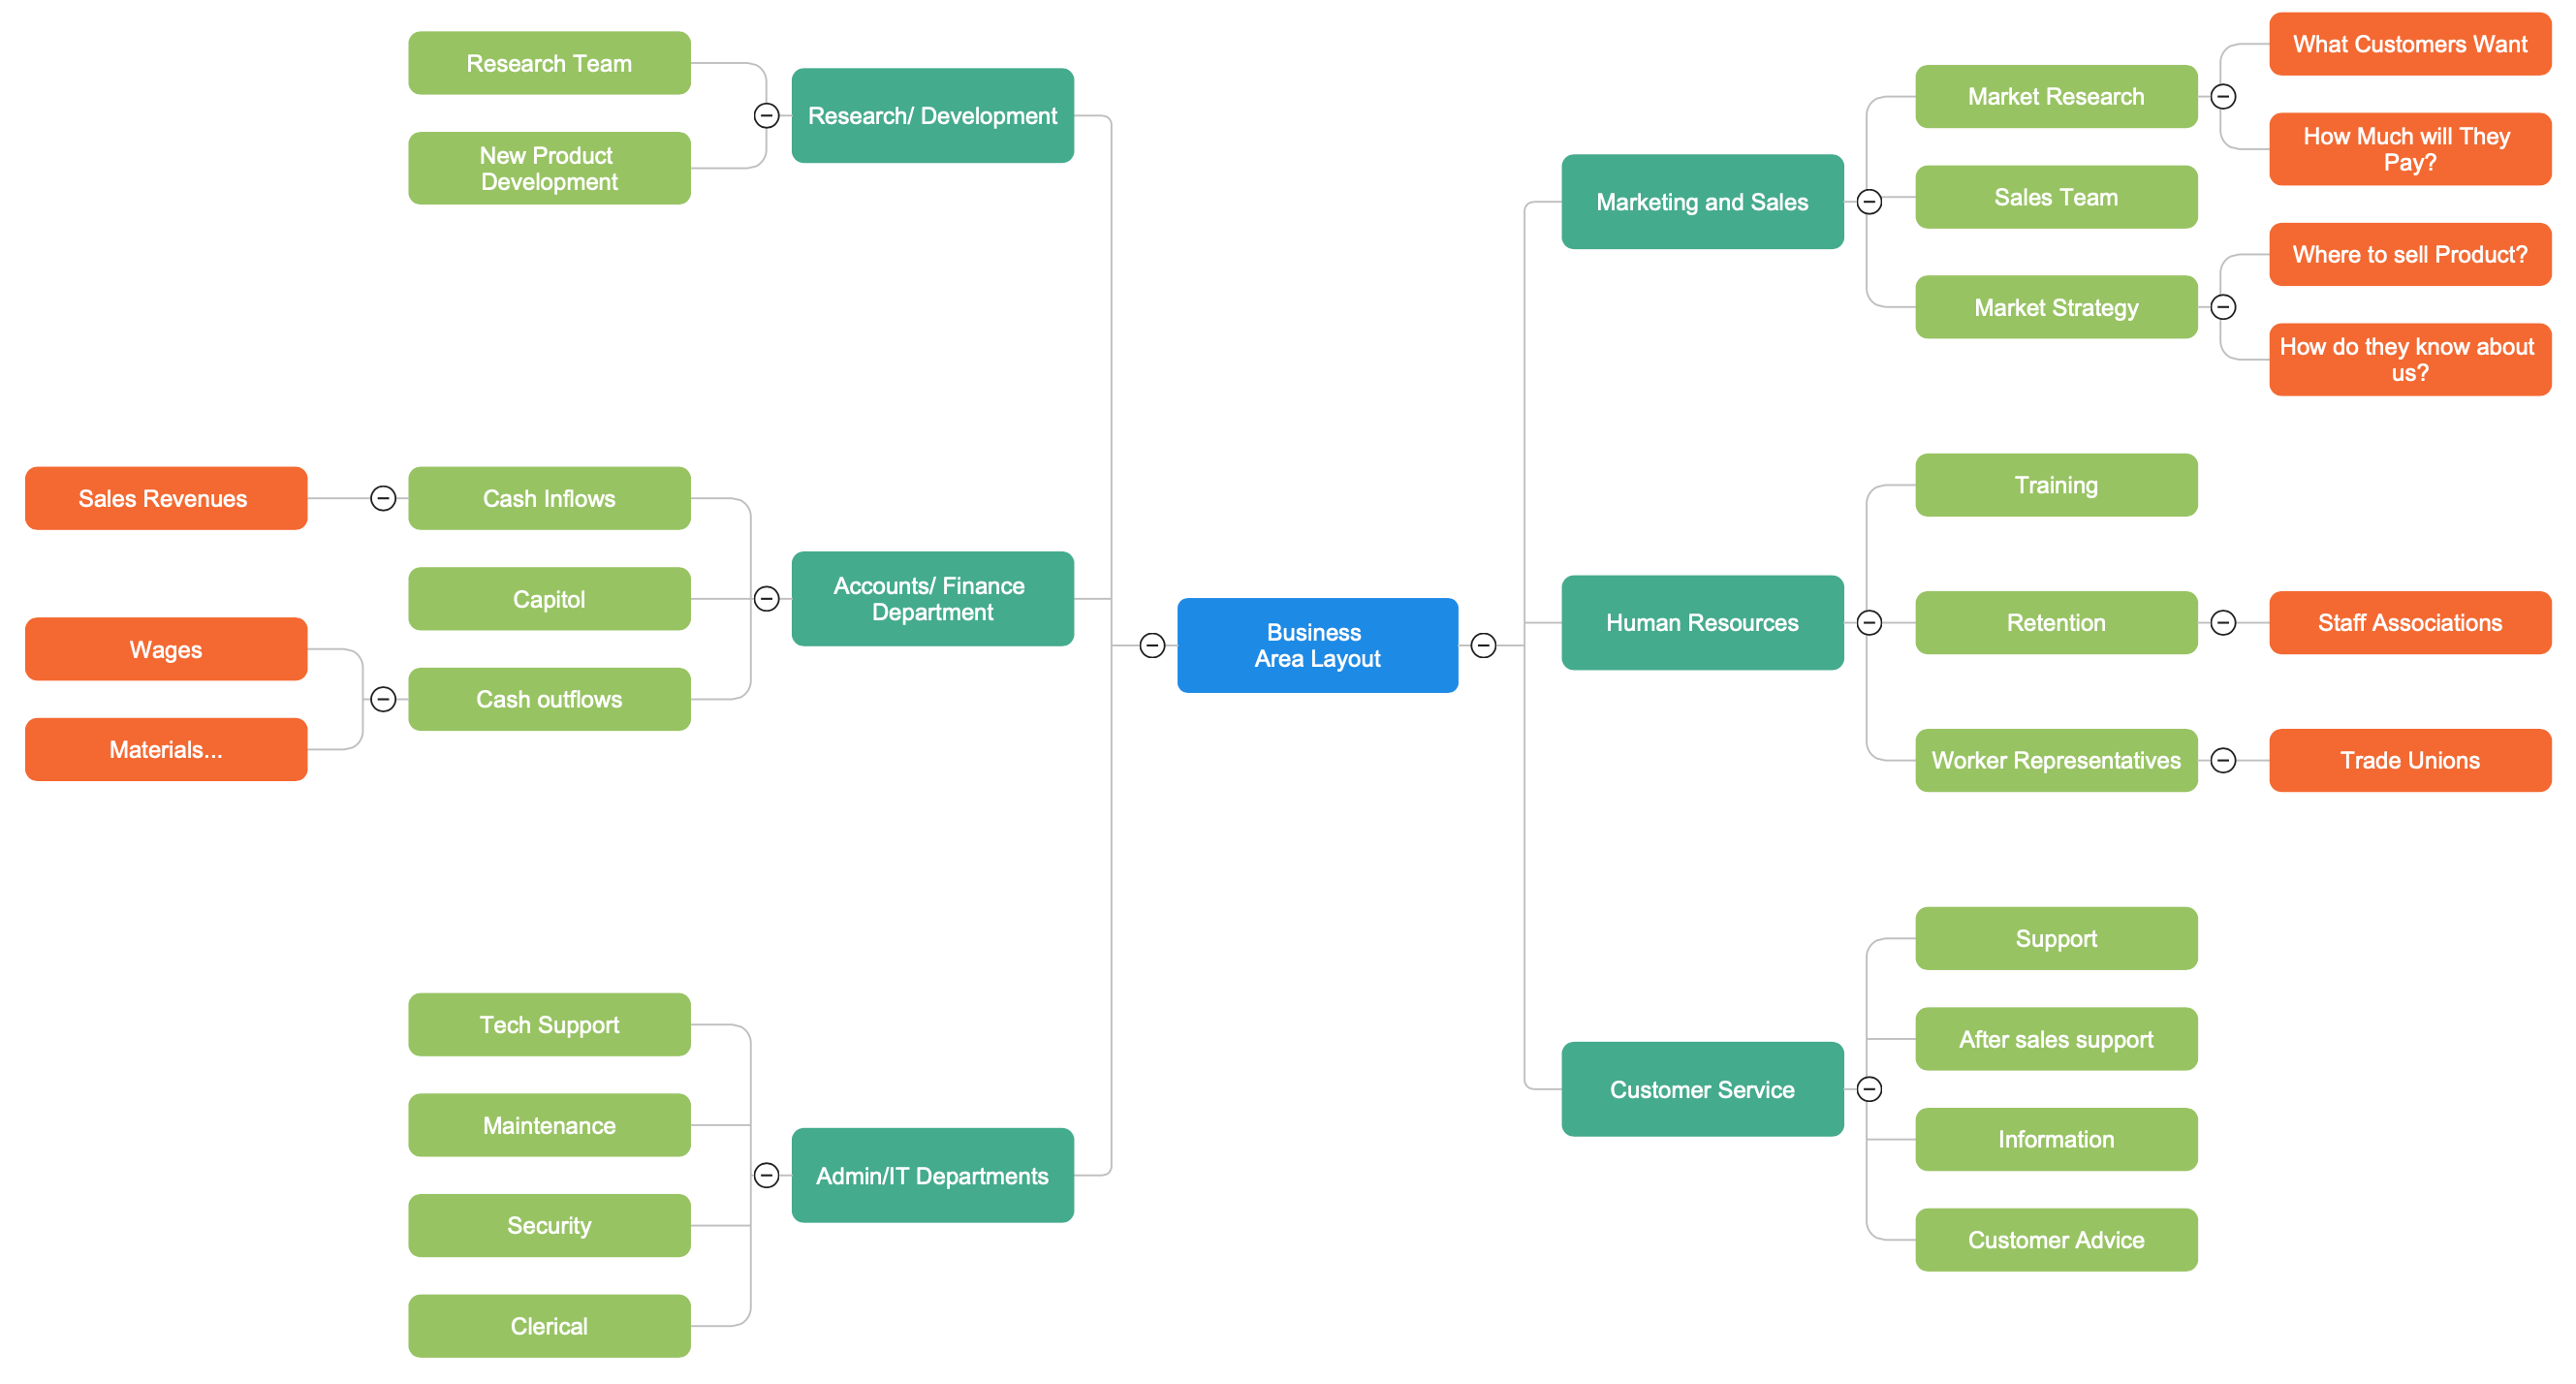 Mind map for organizing information